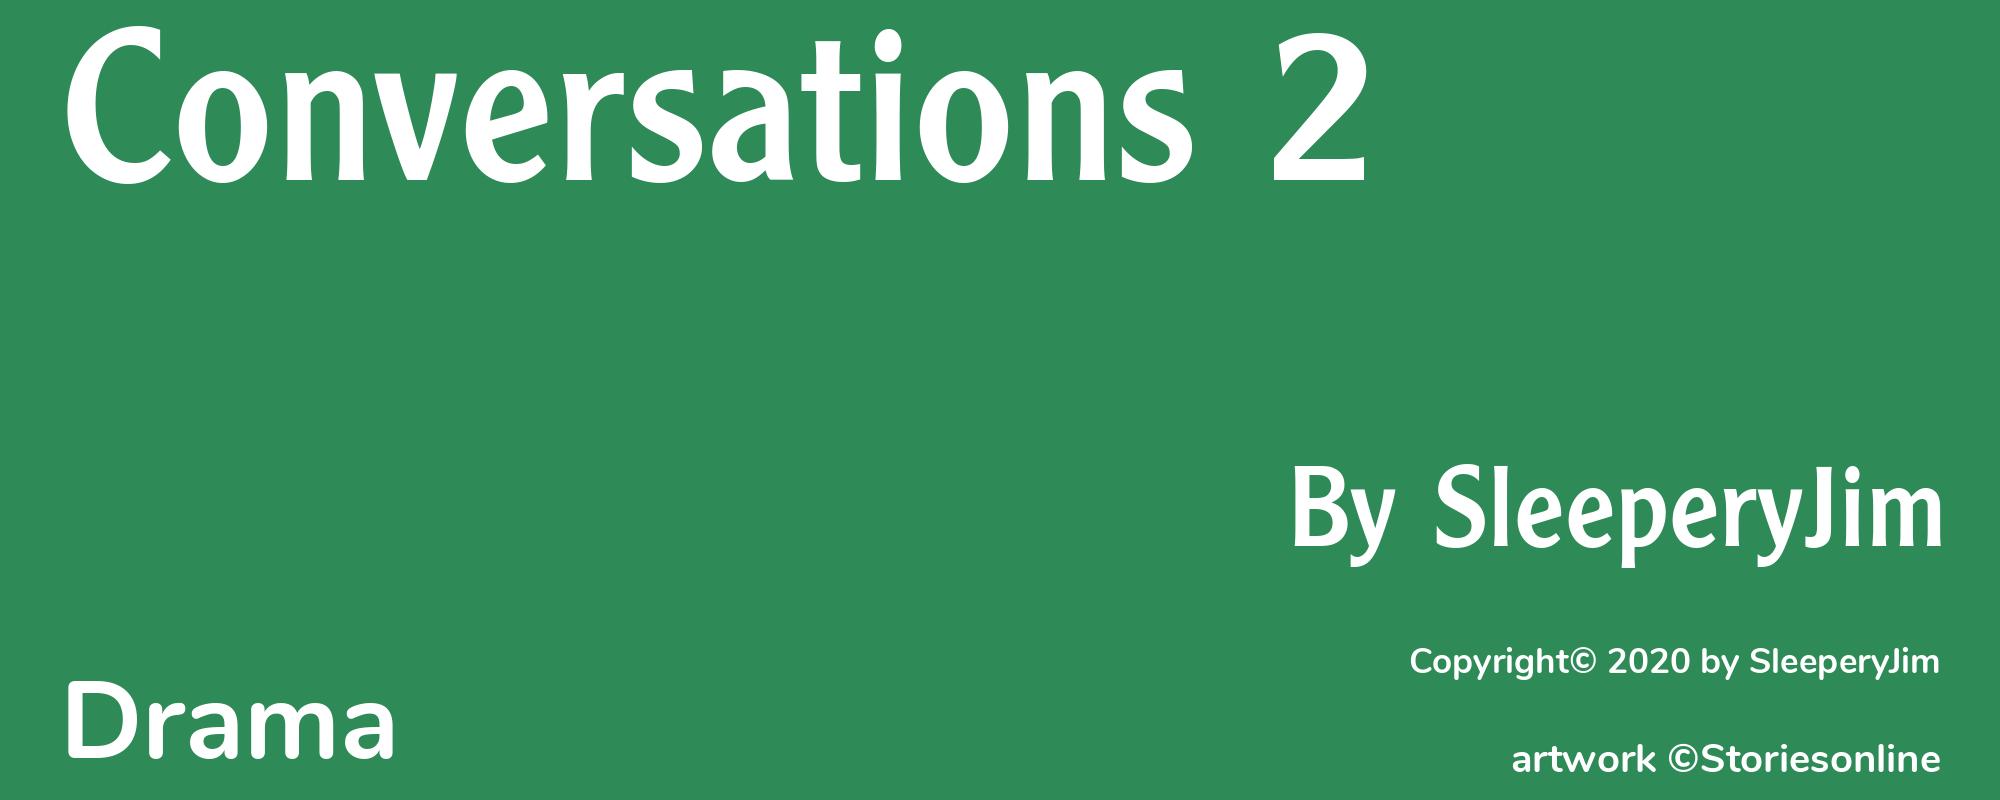 Conversations 2 - Cover